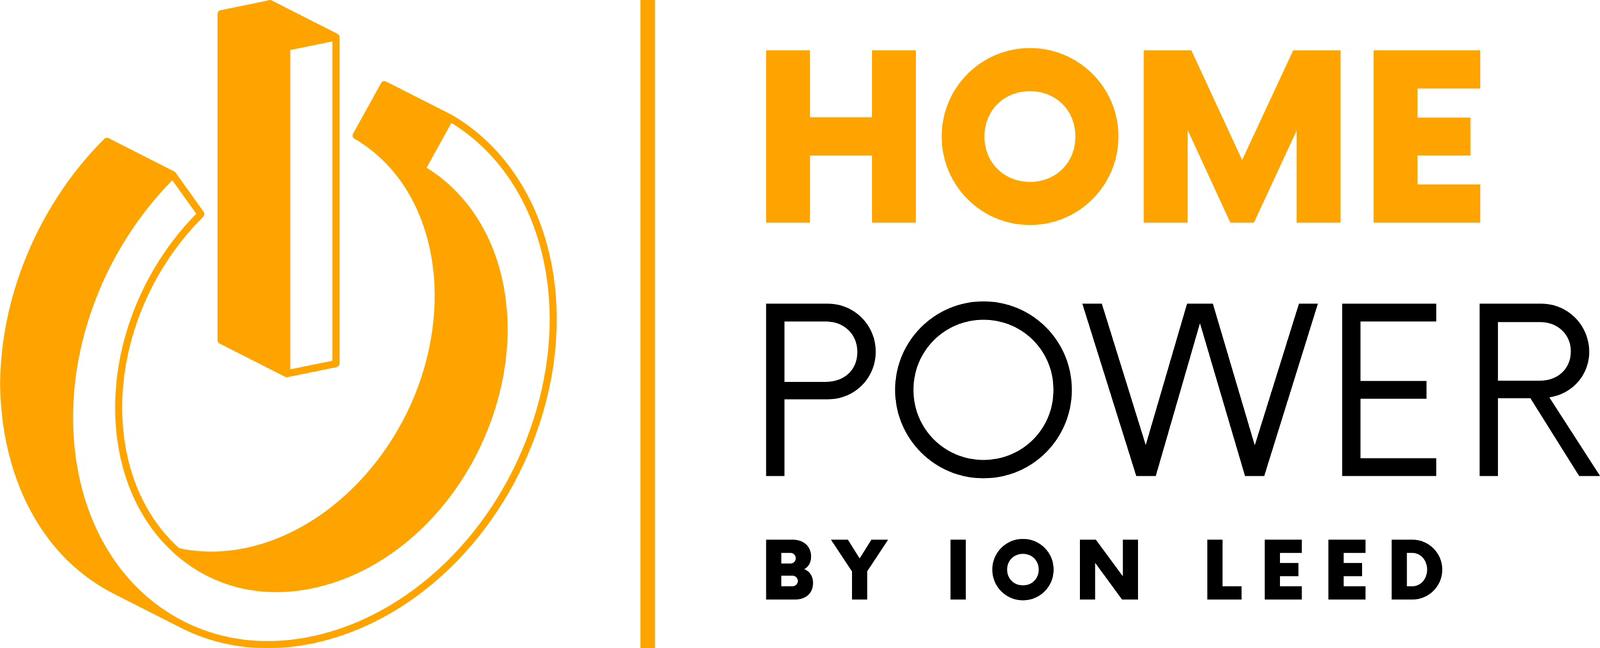 Home Power by ION LEED